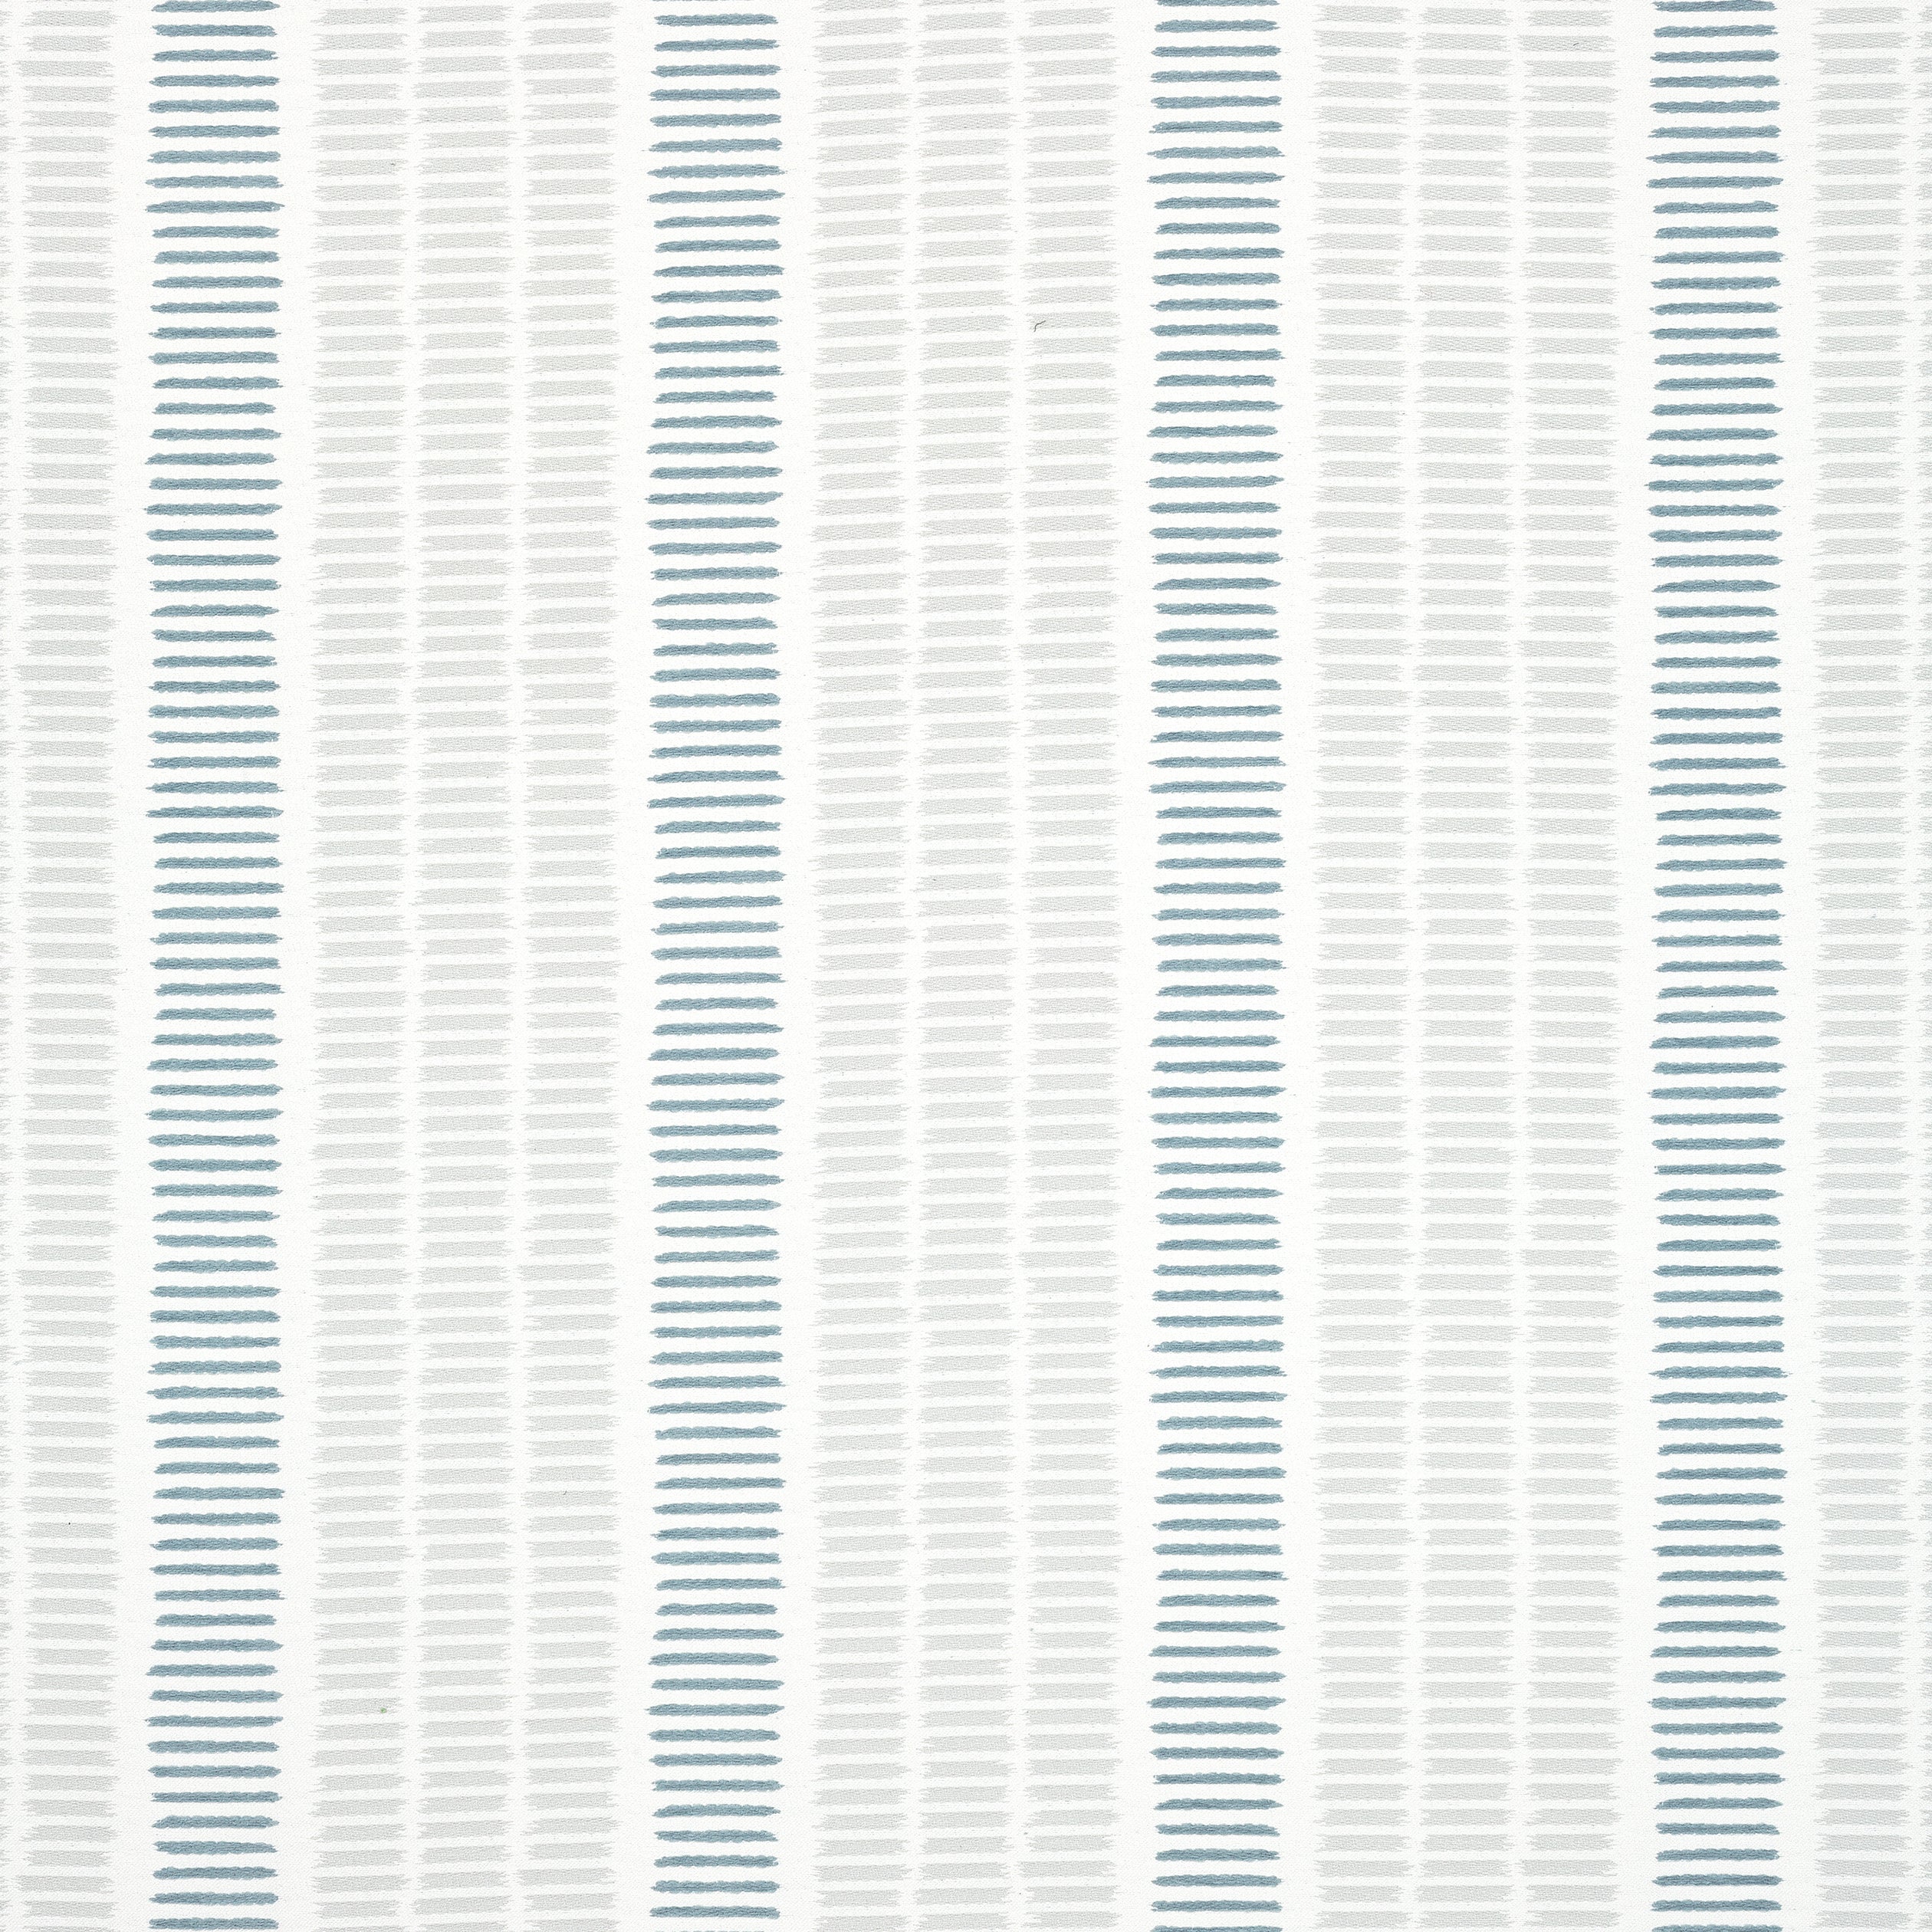 Topsail Stripe fabric in sterling and slate color - pattern number W73518 - by Thibaut in the Landmark collection